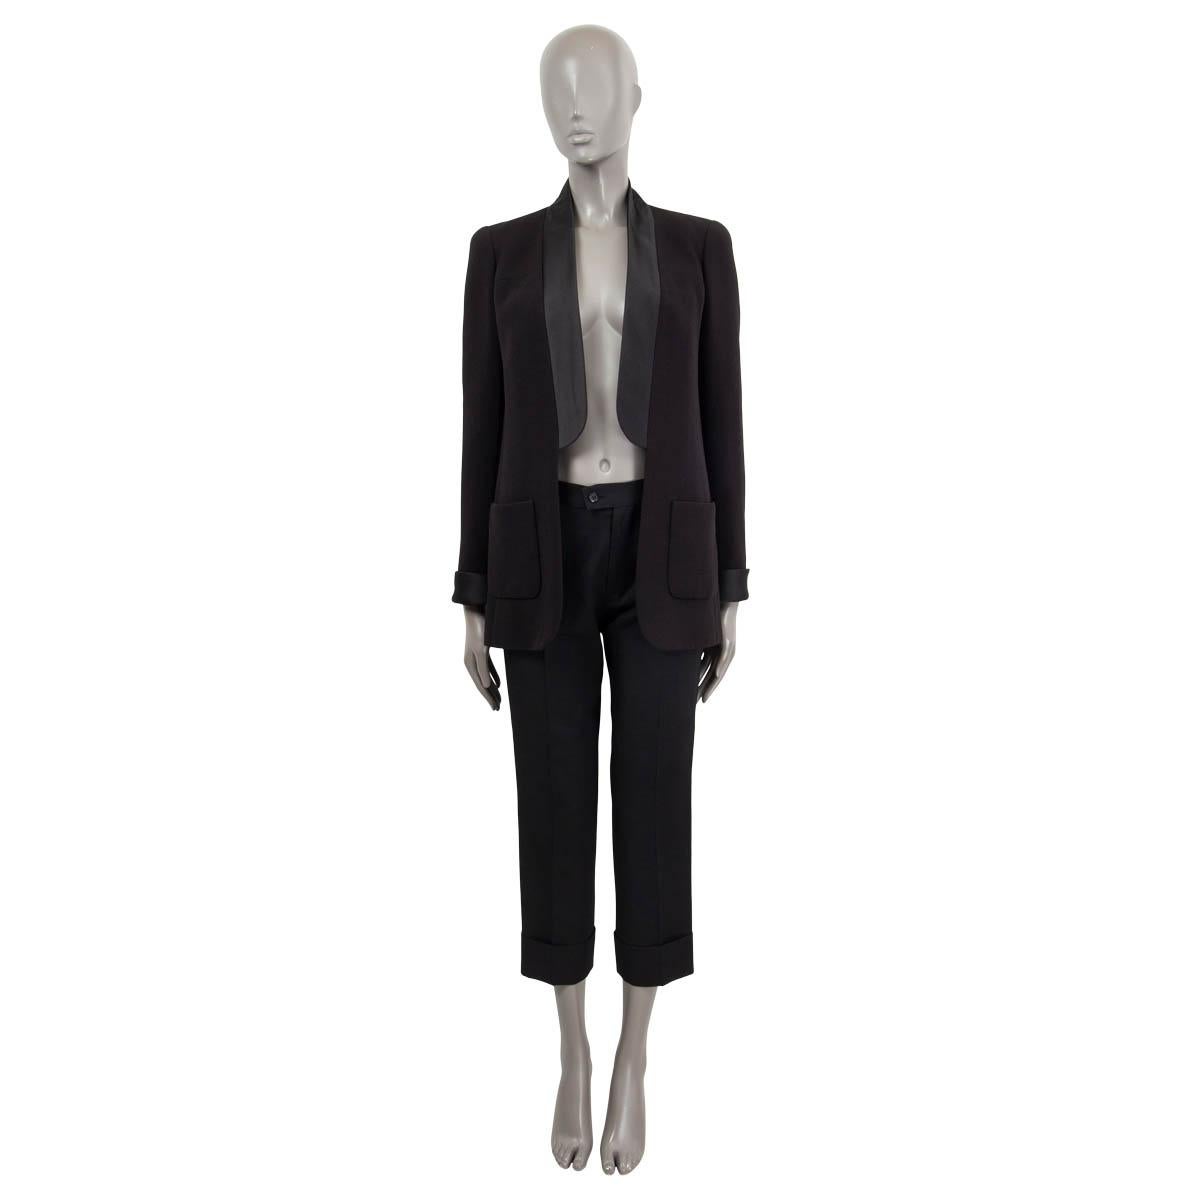 100% authentic Chanel open tuxedo blazer in black wool (100%) with satin shawl collar. Features two patch pockets on the front and satin cuffs with black CC buttons. Lined in silk (100%). Has been worn and is in excellent condition.

2018